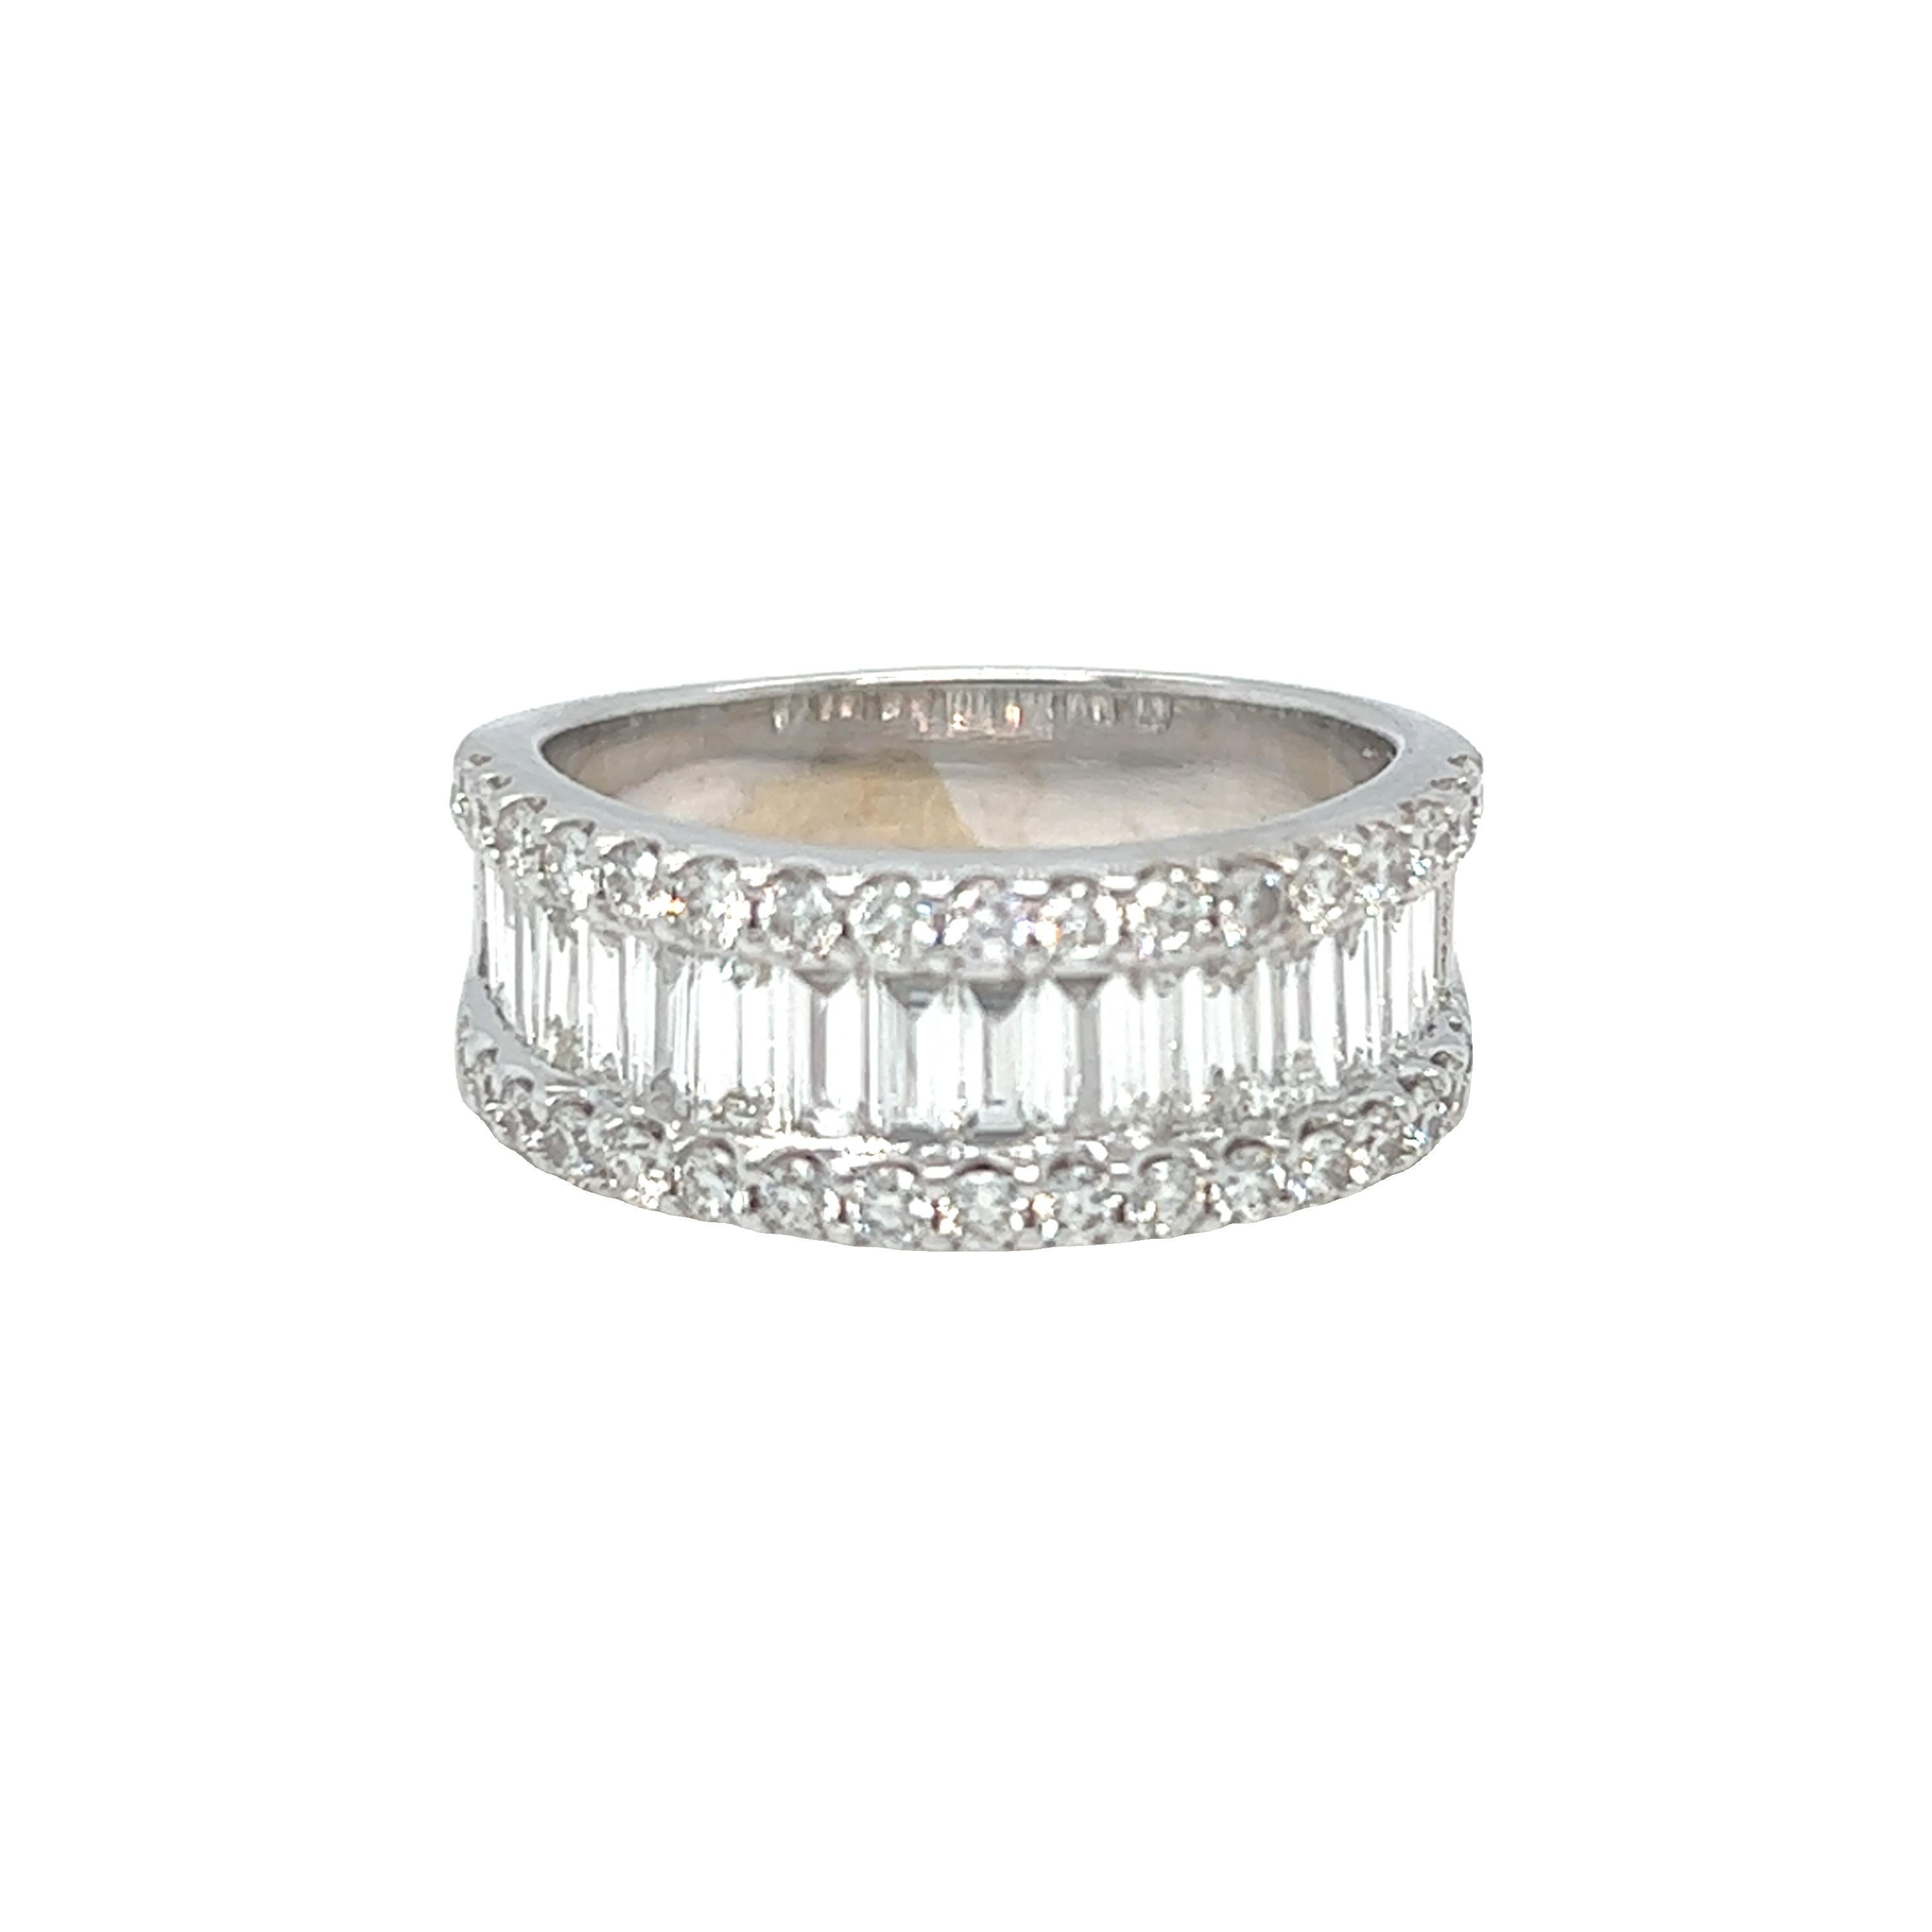 This modern designed half eternity ring features mixed cuts of baguette and round brilliant cut diamonds, G-H color and VS clarity. The total weight of diamonds is approximately 2 carats. The diamonds are set in prongs half way down the ring for